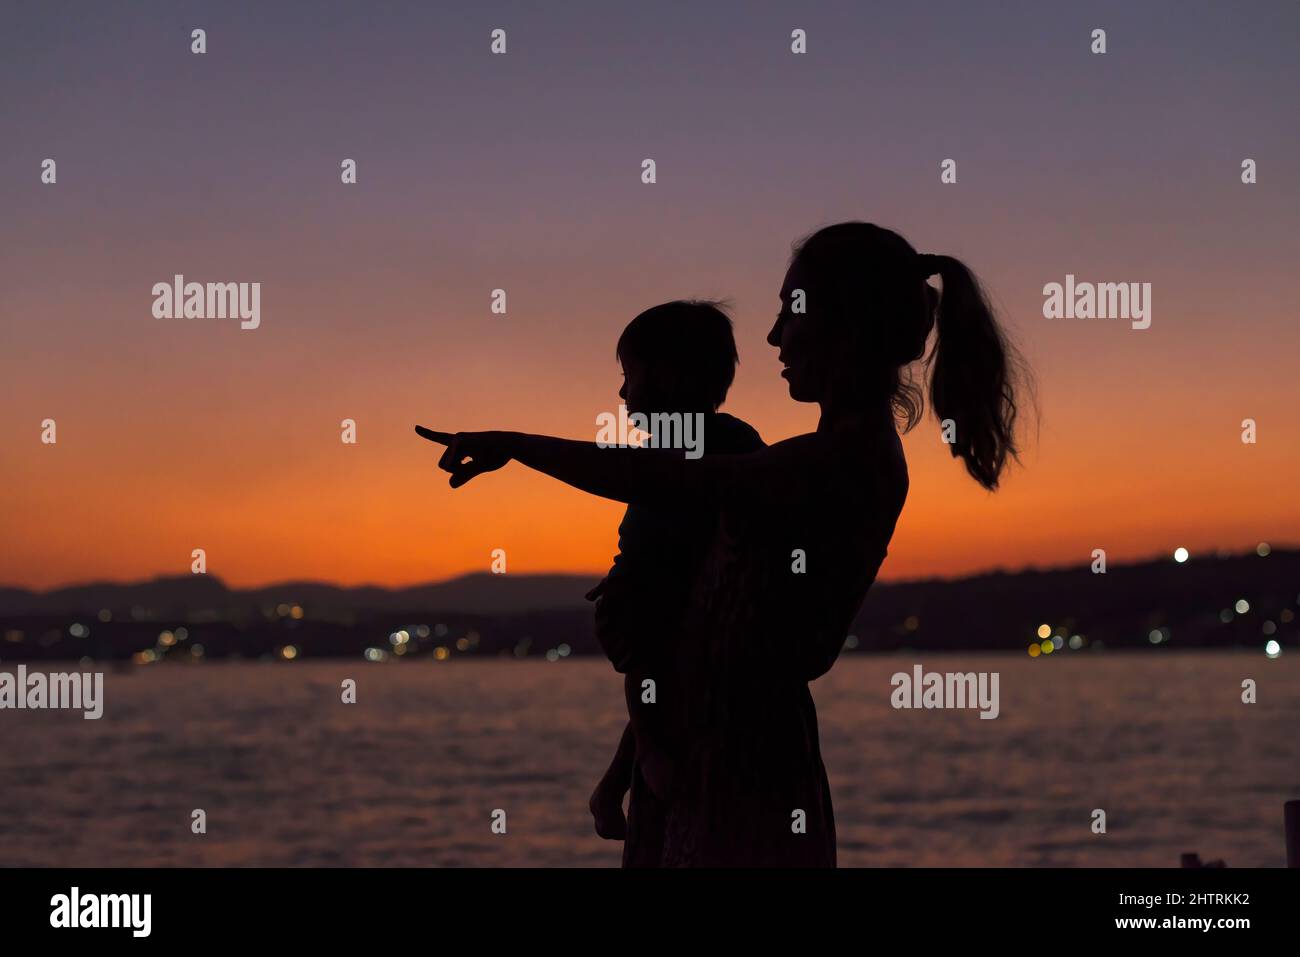 Silhouette of a Mom and a baby boy pointing to the horizon at dusk Stock Photo